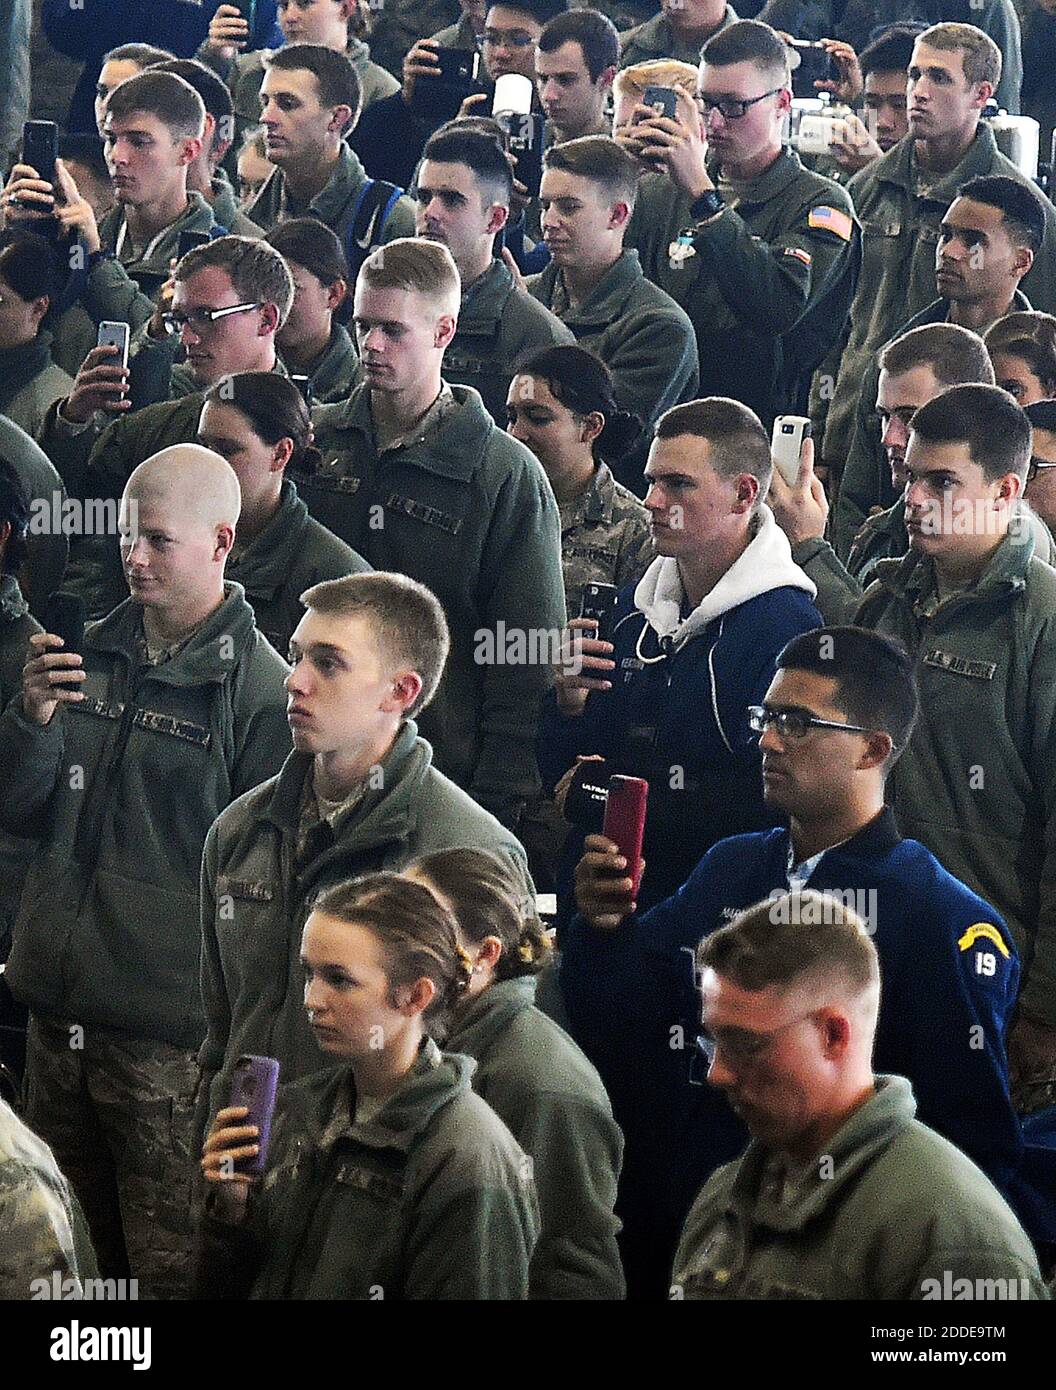 NO FILM, NO VIDEO, NO TV, NO DOCUMENTARY - Cadets listen as the Superintendent of the United States Air Force Academy, Lt Gen. Jay Silveria, gave an passioned anti-rascism speech during lunch at the Air Force Academy on Sept. 28, 2017 in Colorado Springs, Colo. He told the cadets to pull out their camera phones to record the main message. Photo by Jerilee Bennett/Colorado Springs Gazette/TNS/ABACAPRESS.COM Stock Photo